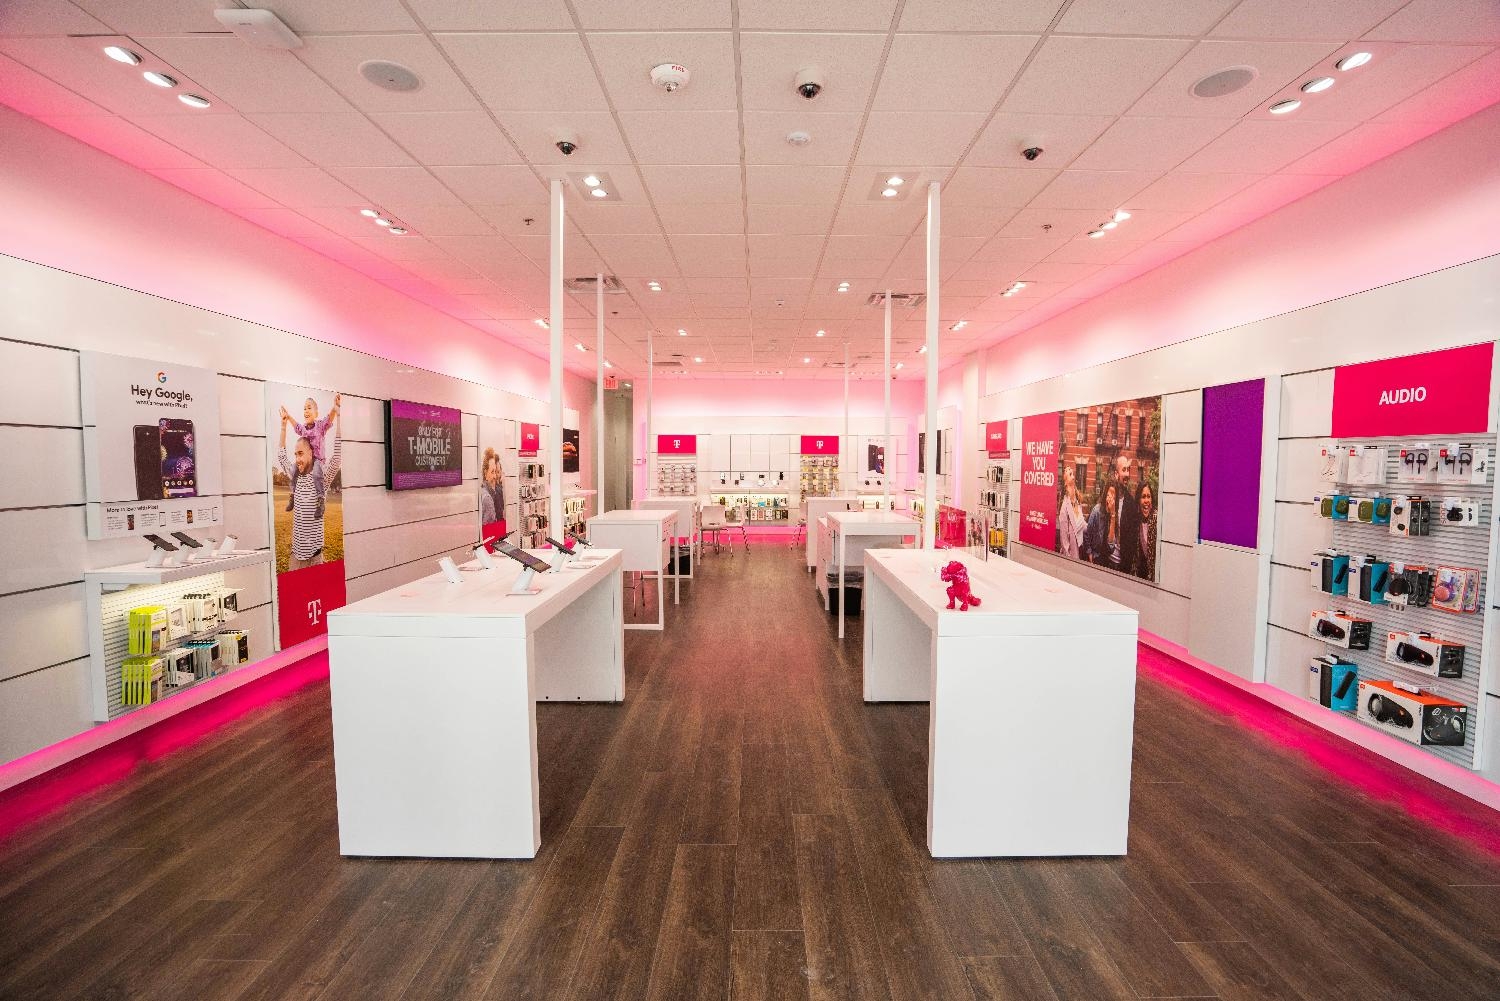 Mobile experts serve 104 million customers at thousands of T-Mobile and Metro by T-Mobile retail stores across the U.S. 